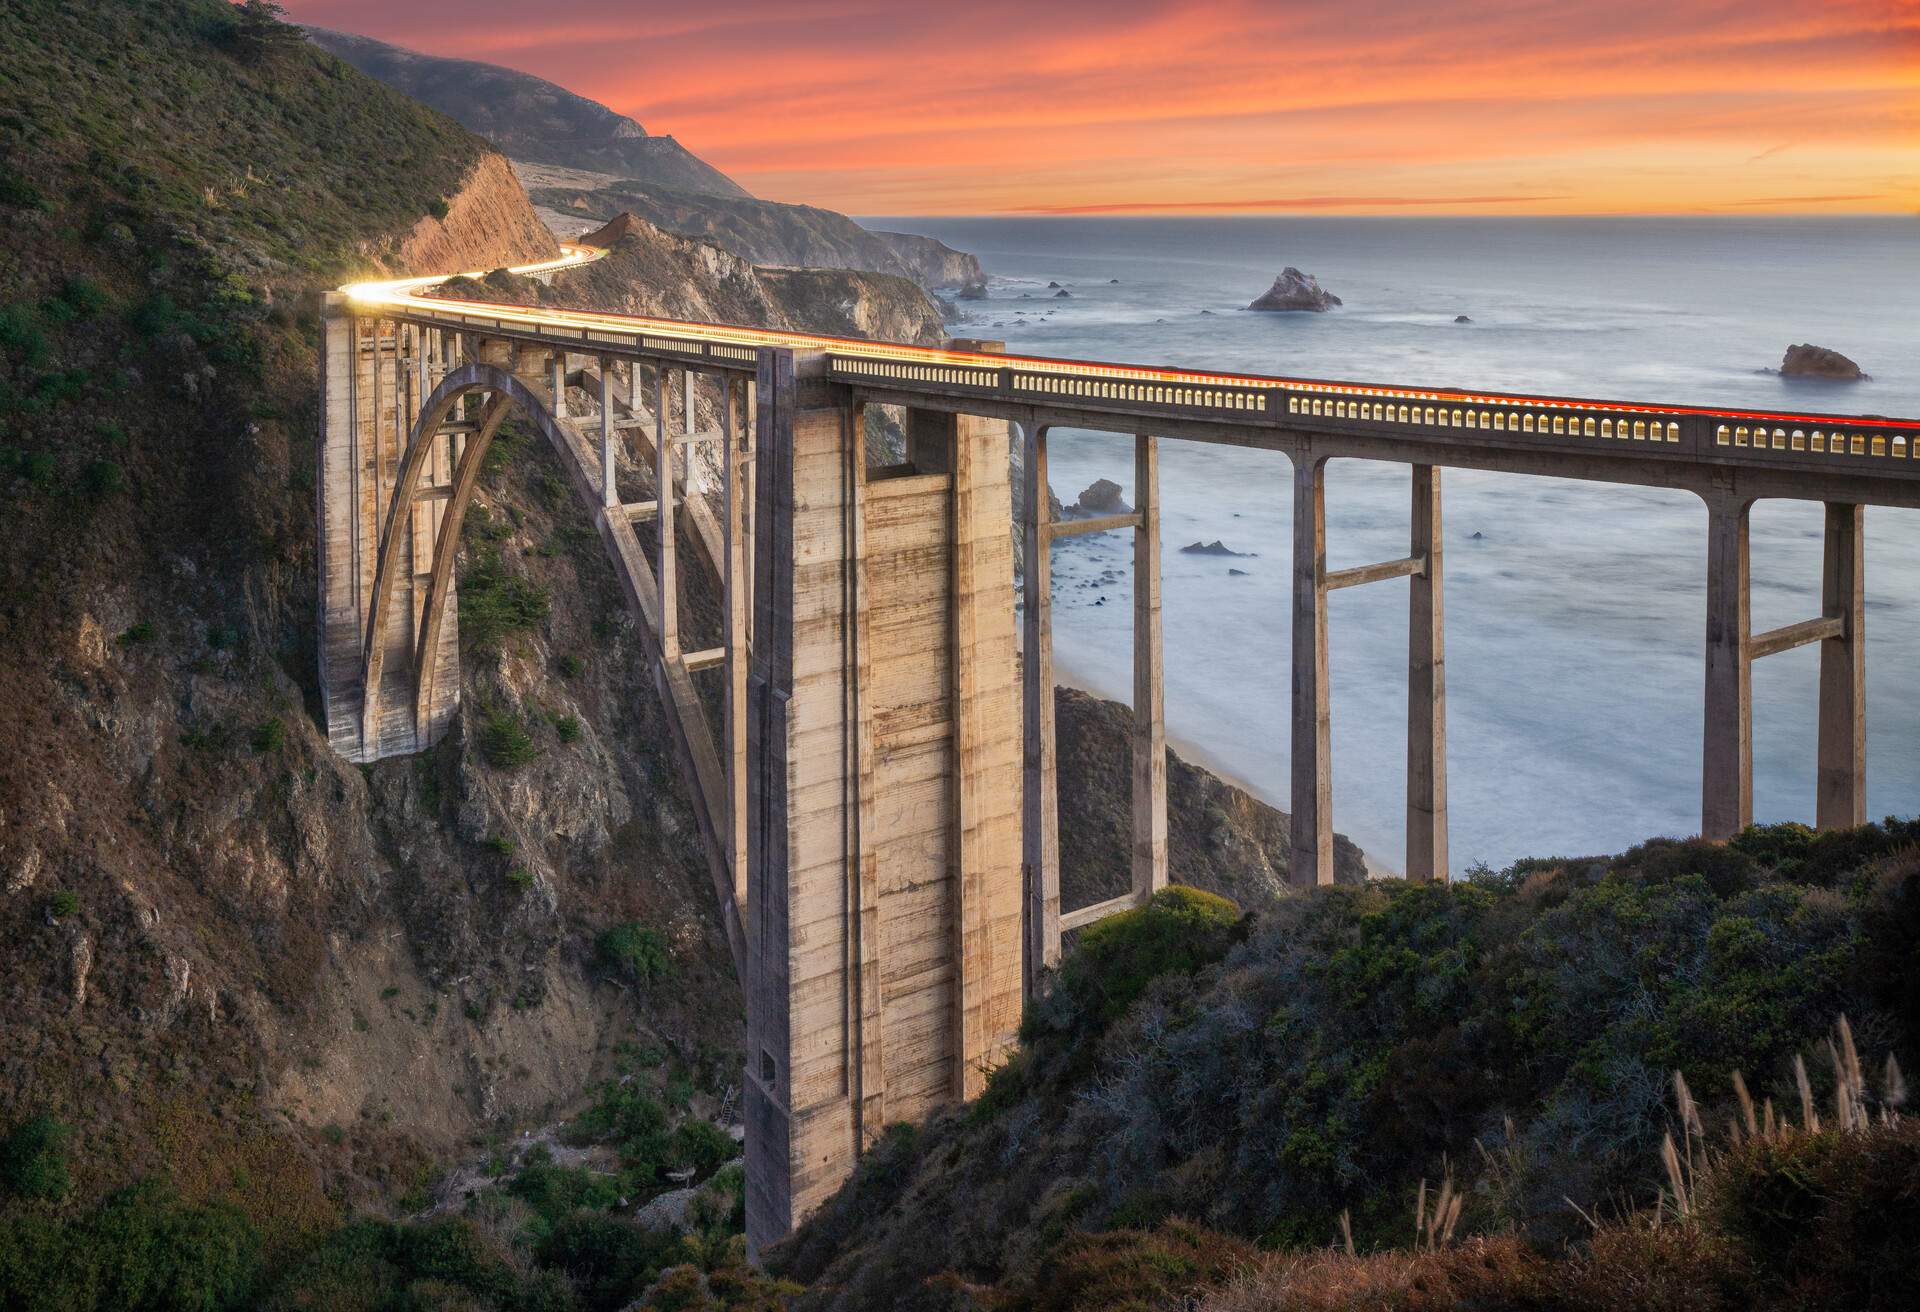 This is an image of Bixby Bridge in Big Sur California. The bridge was built in 1932 and has become one of the most iconic structures on the California coast.